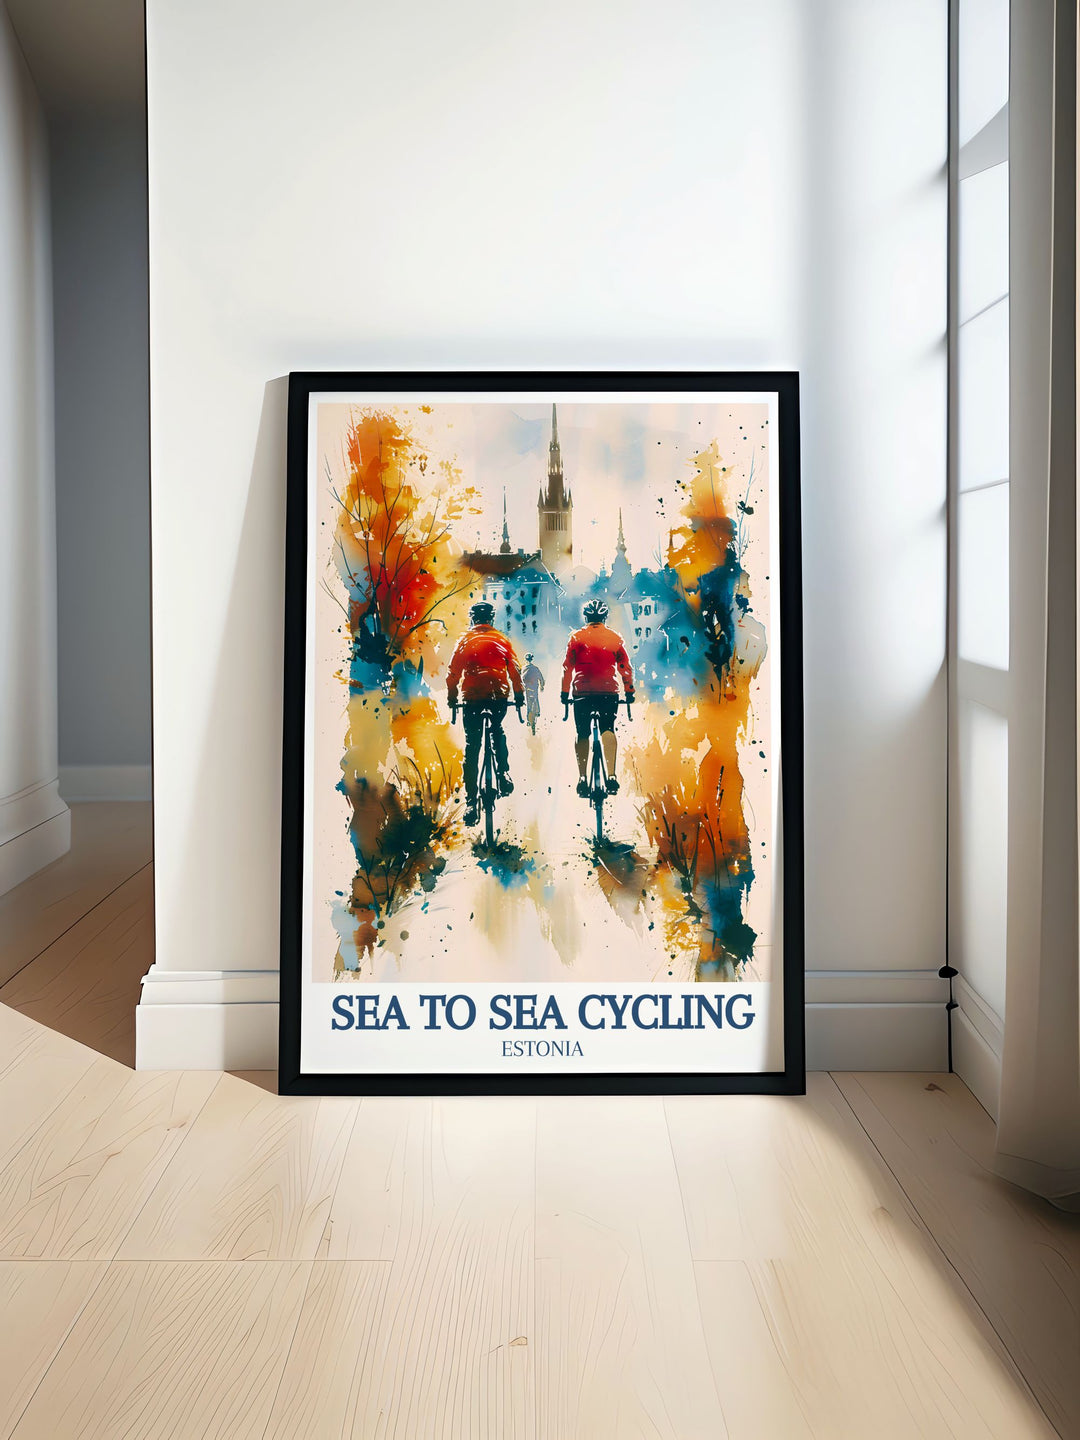 This vintage inspired poster of the Sea to Sea Cycling Route captures the breathtaking landscapes of England, from the Cliffs of Dover to the serene Lake District, perfect for your home decor and cycling art collection.